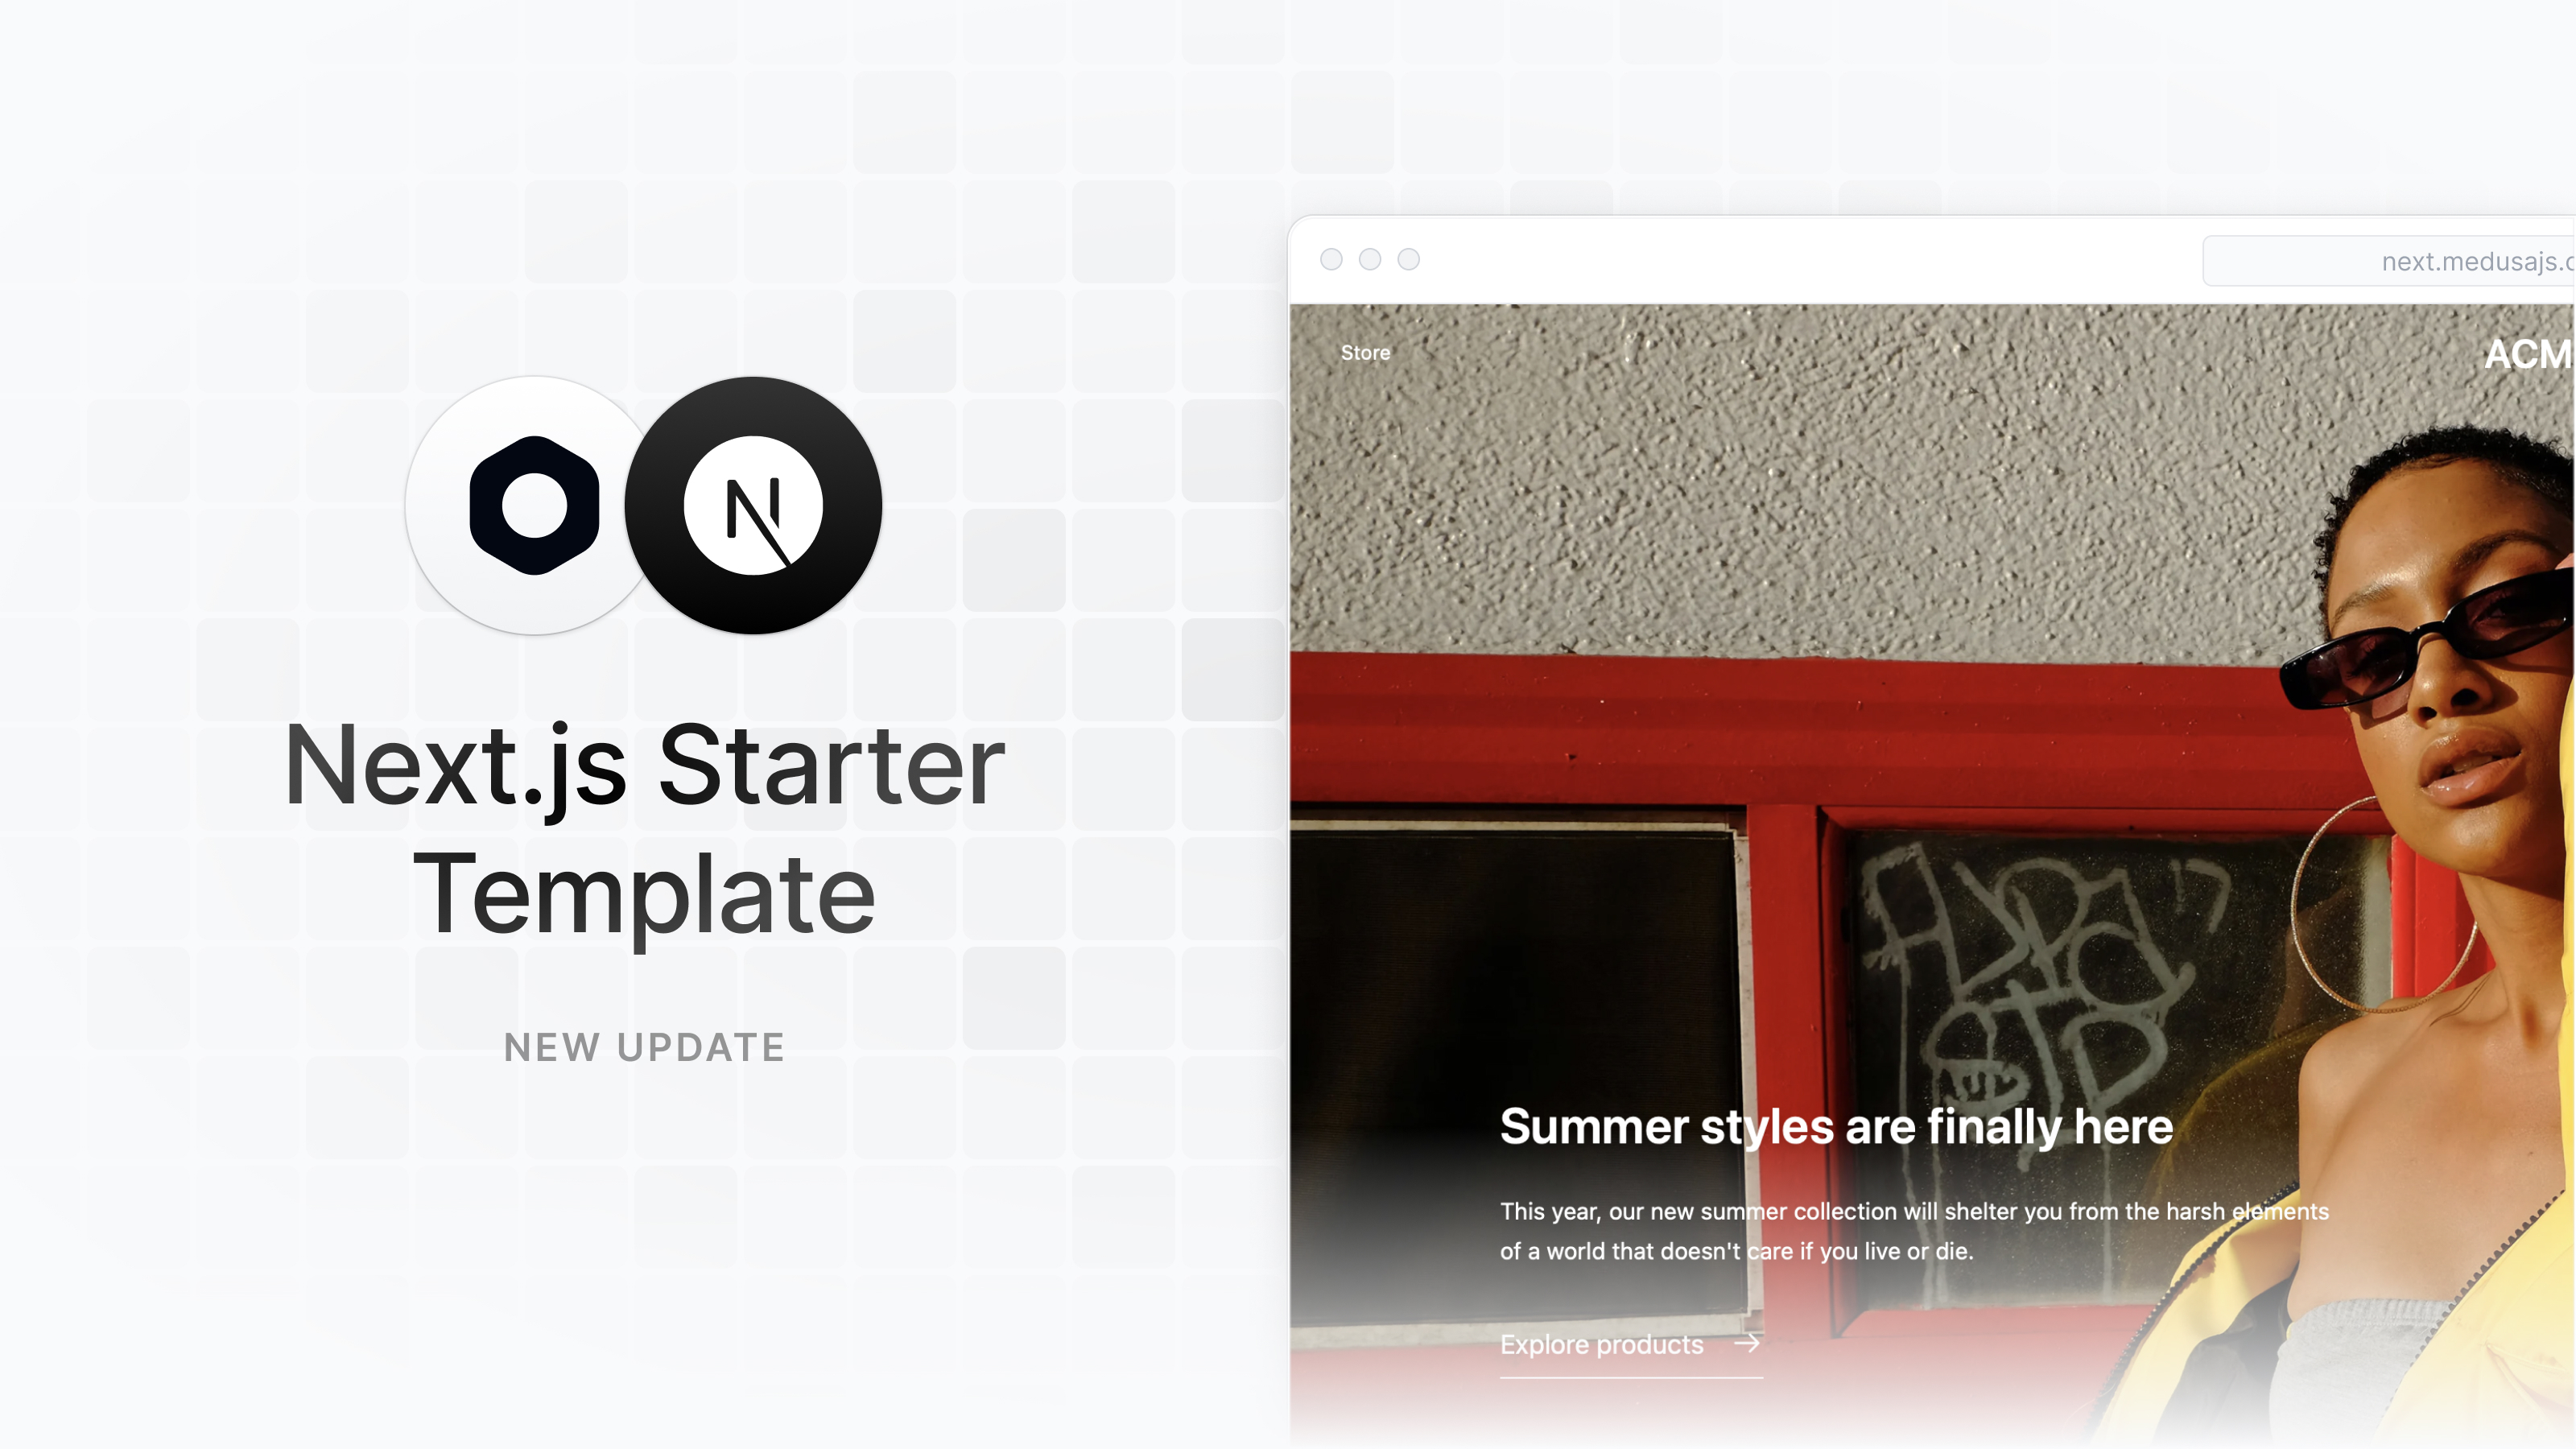 Announcing Next.js Starter with App Router support - thumbnail image